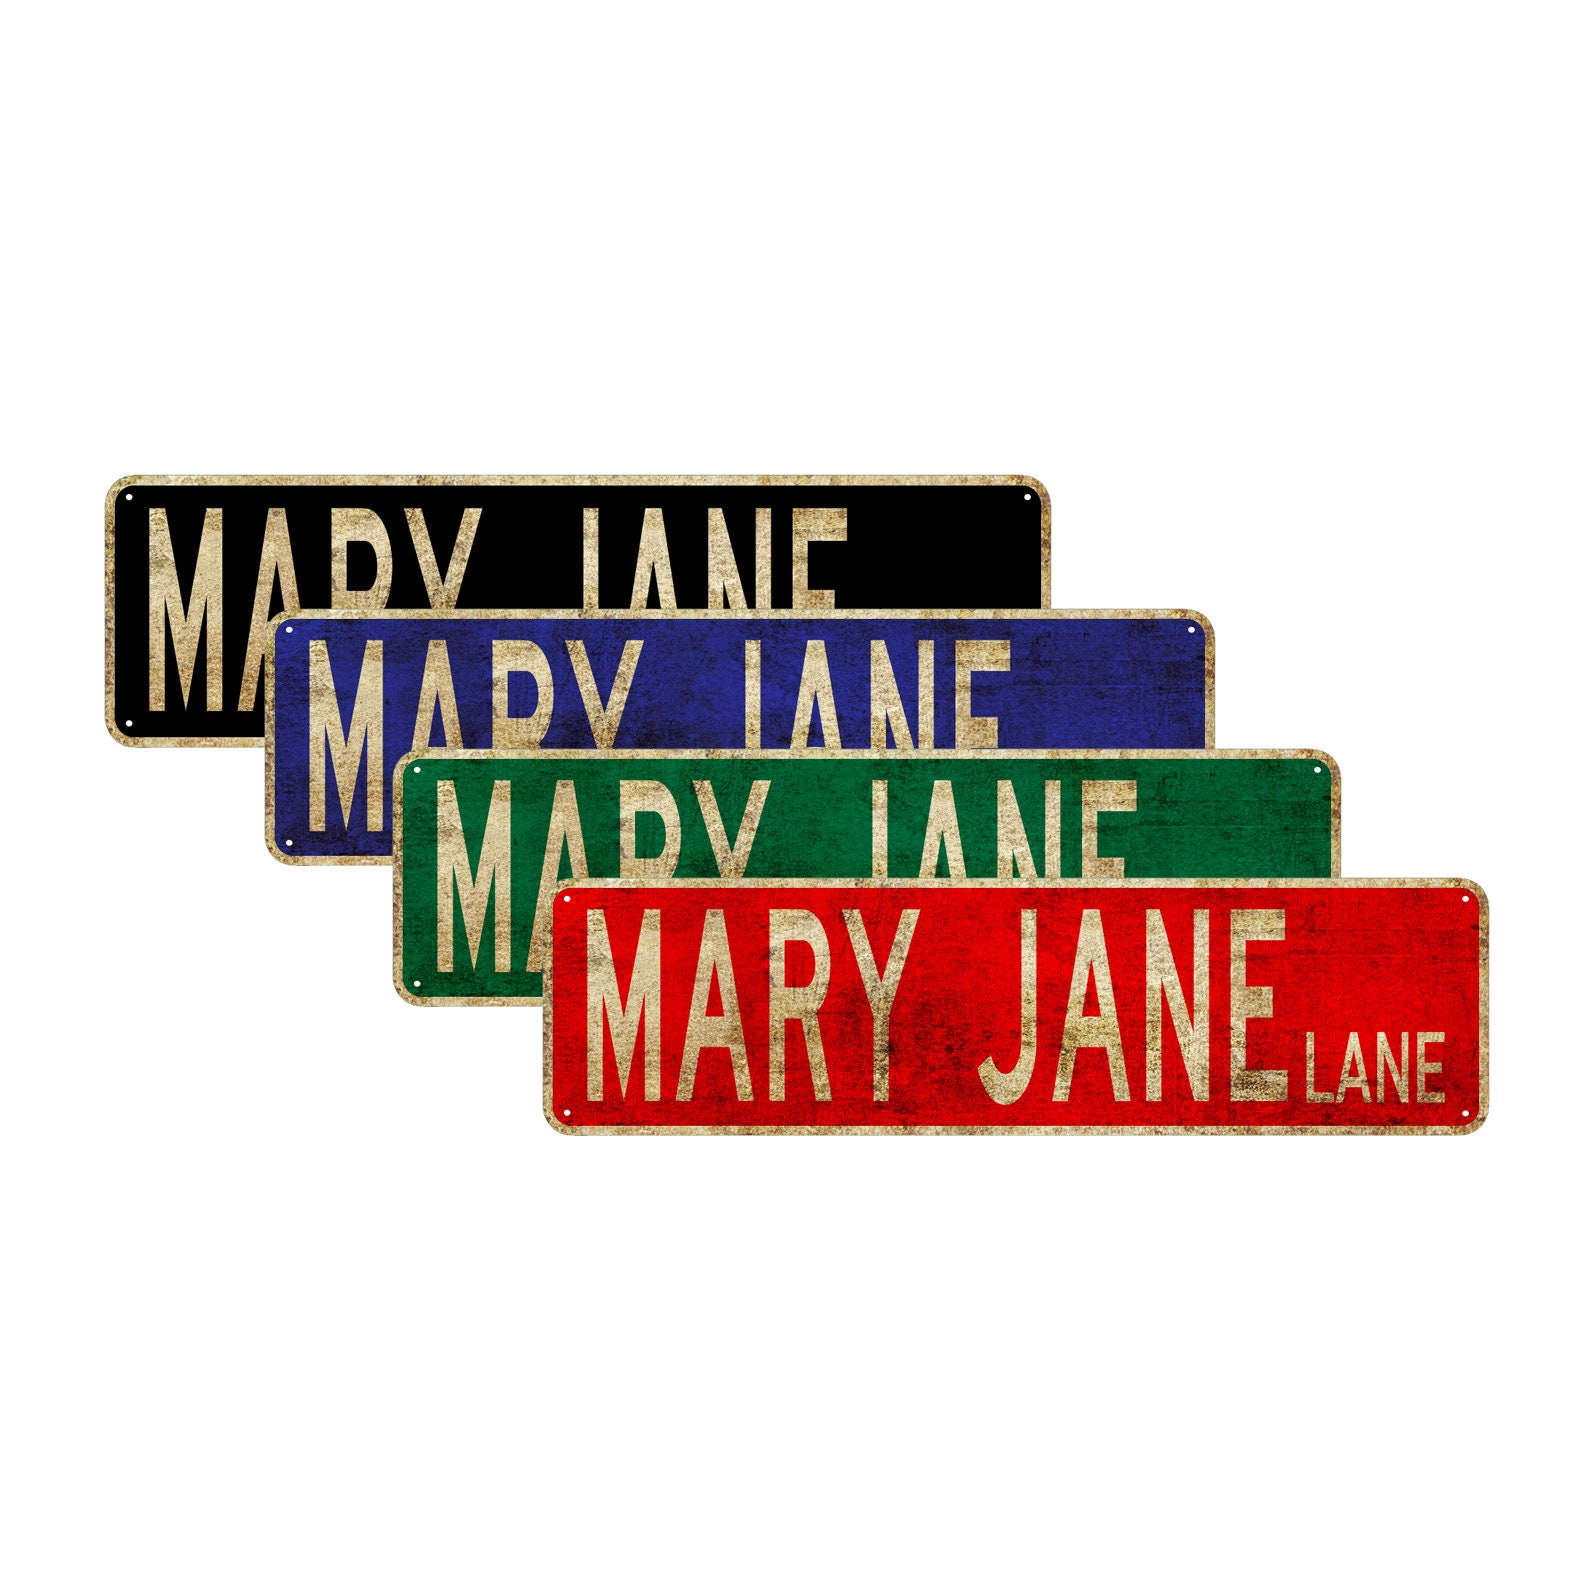 Mary Jane Lane Street Sign 6x16 inch Vintage Rustic Retro Wall Decor Funny Metal Tin Sign 